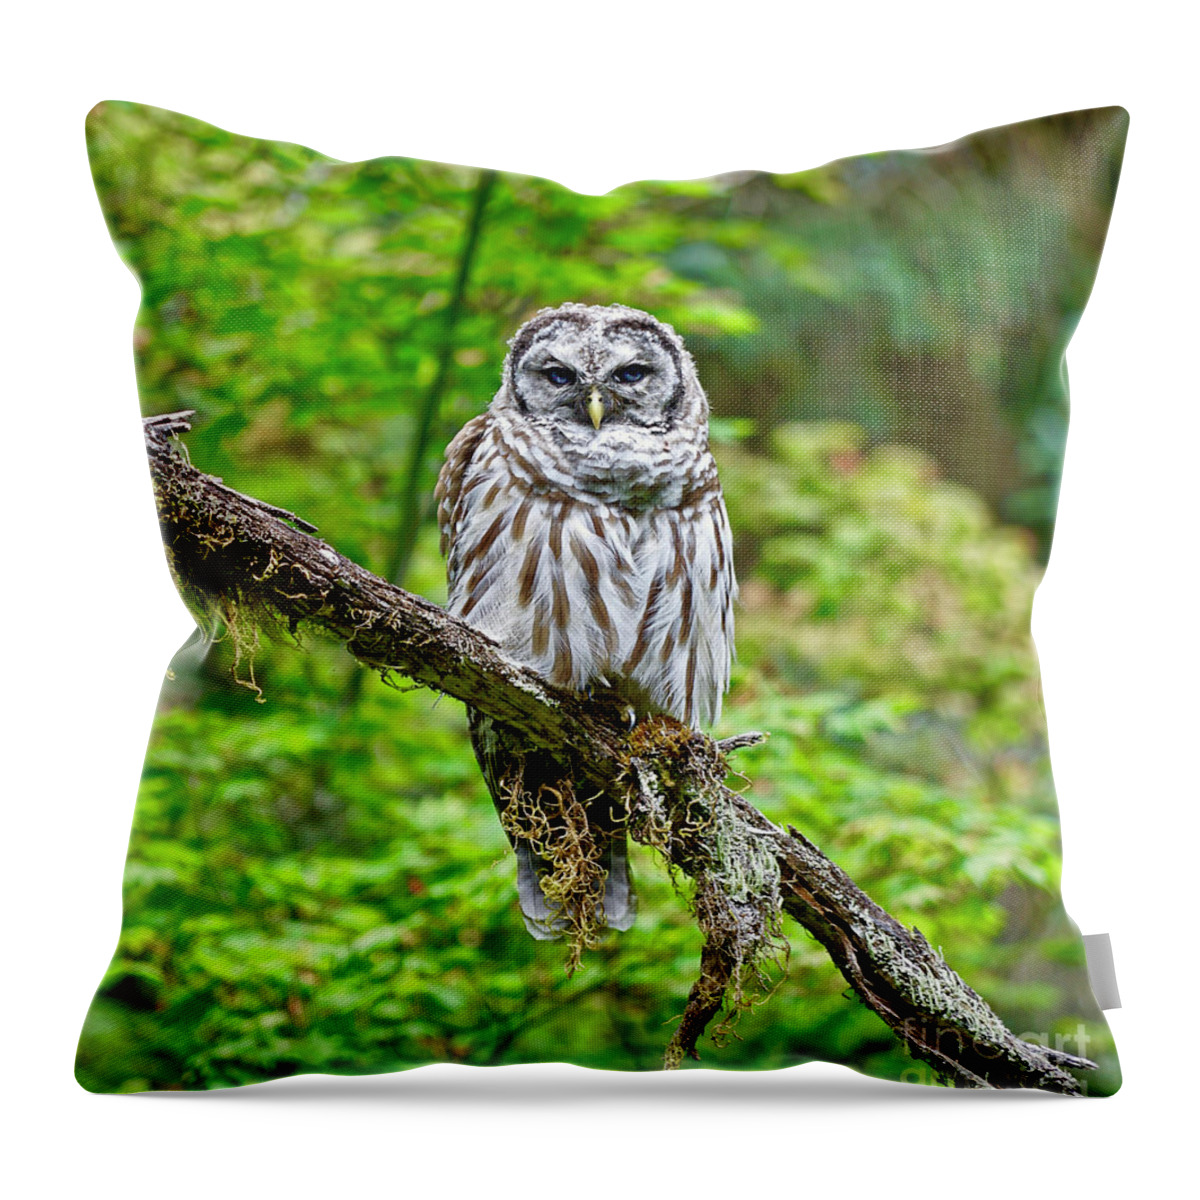 Bird Throw Pillow featuring the photograph Barred Owl by Michael Cinnamond